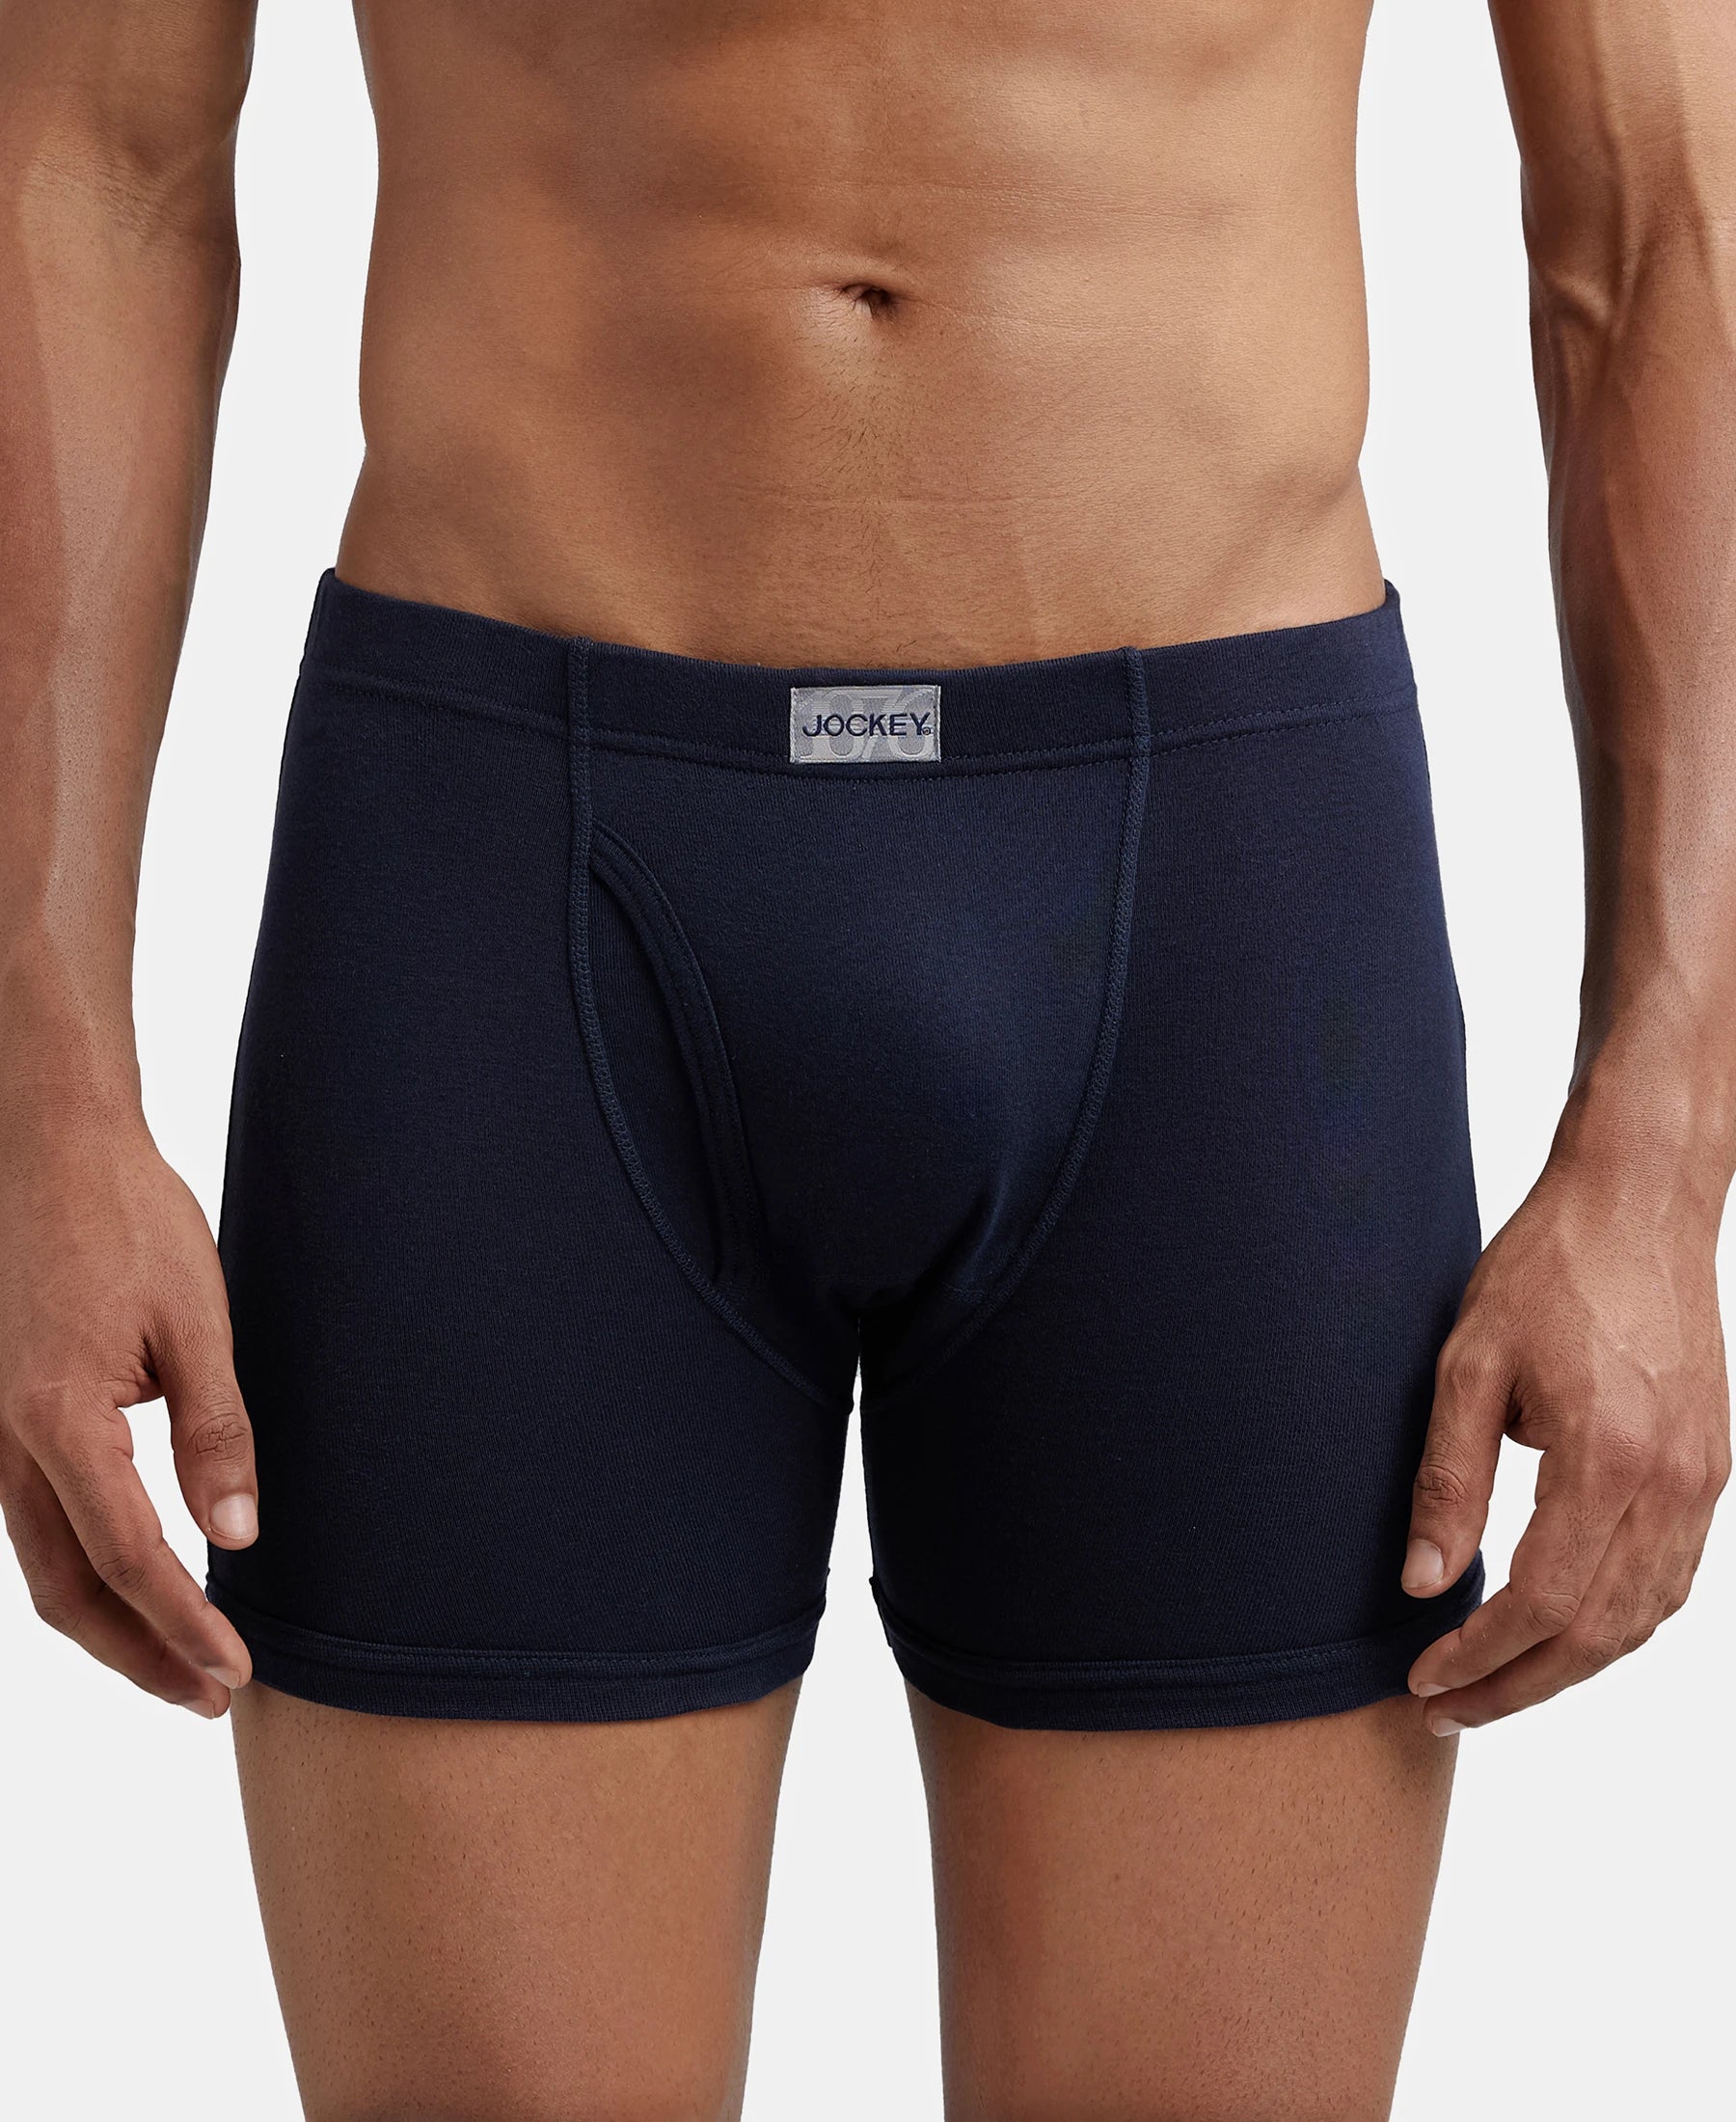 Jockey Super Combed Cotton Rib Solid Trunks (Deep Navy, M, 85 - 90 cms)  Price - Buy Online at ₹539 in India